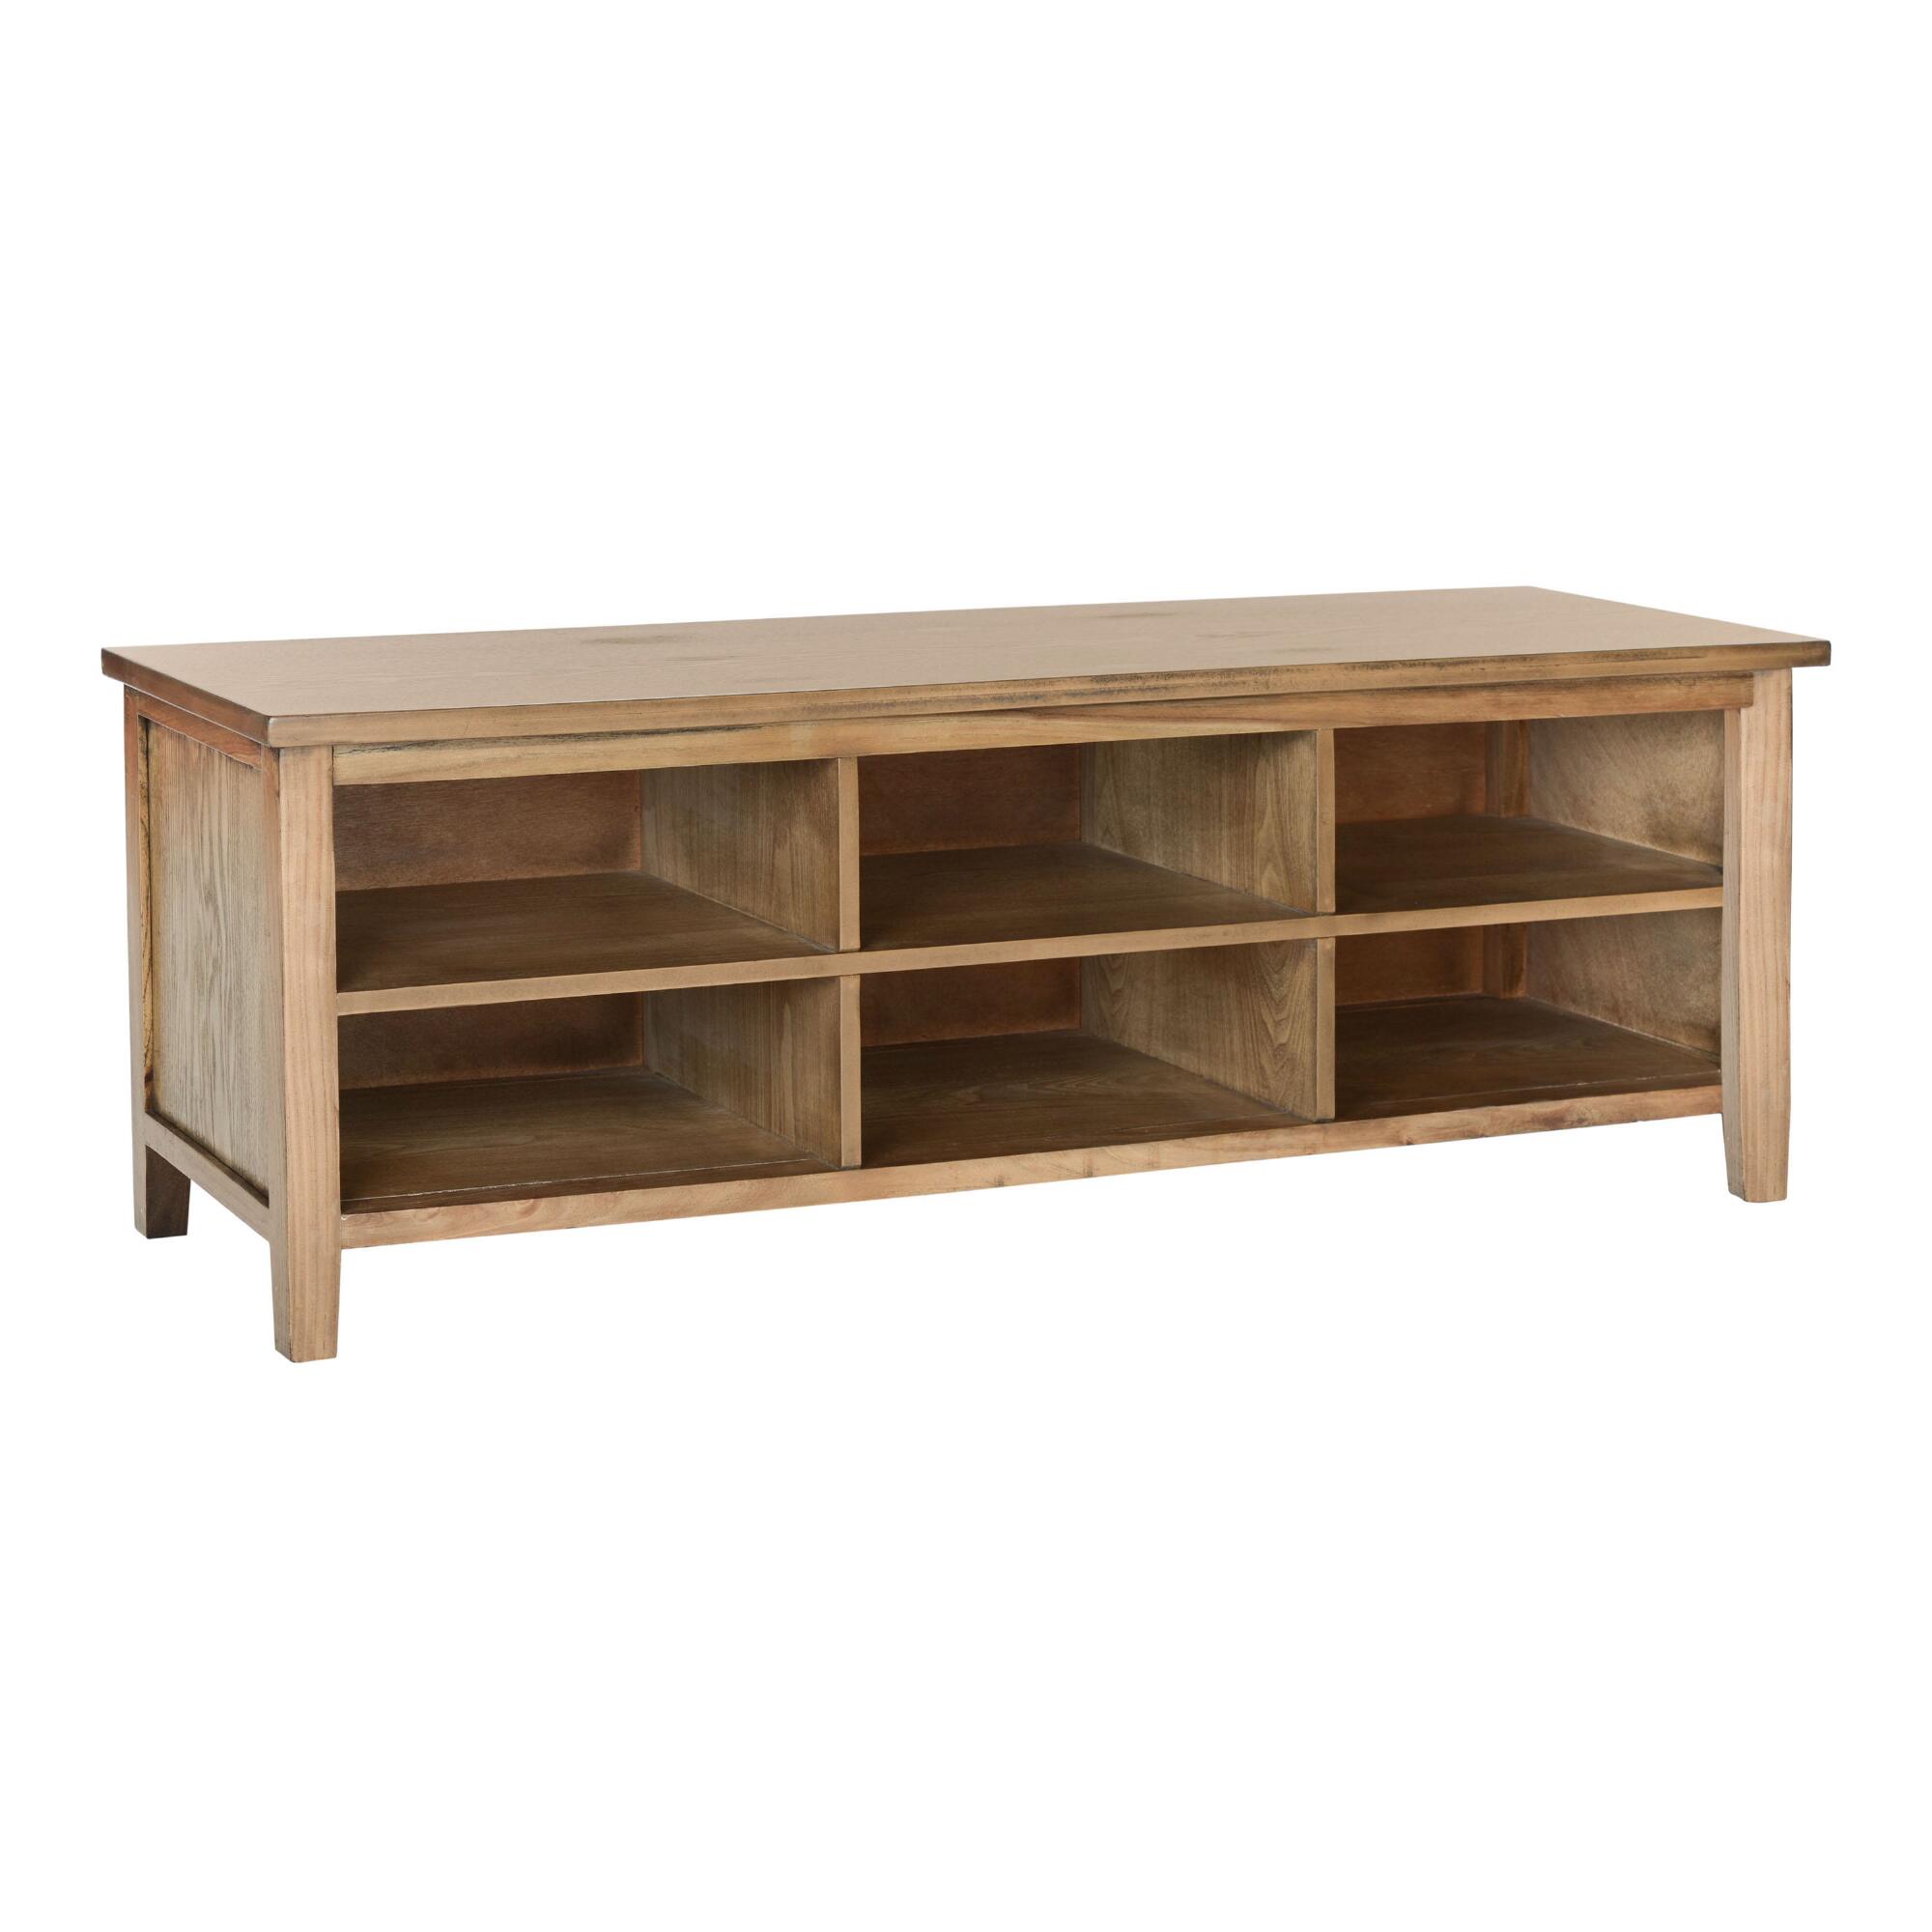 Low Wood Oxford Bookshelf: White/Natural by World Market